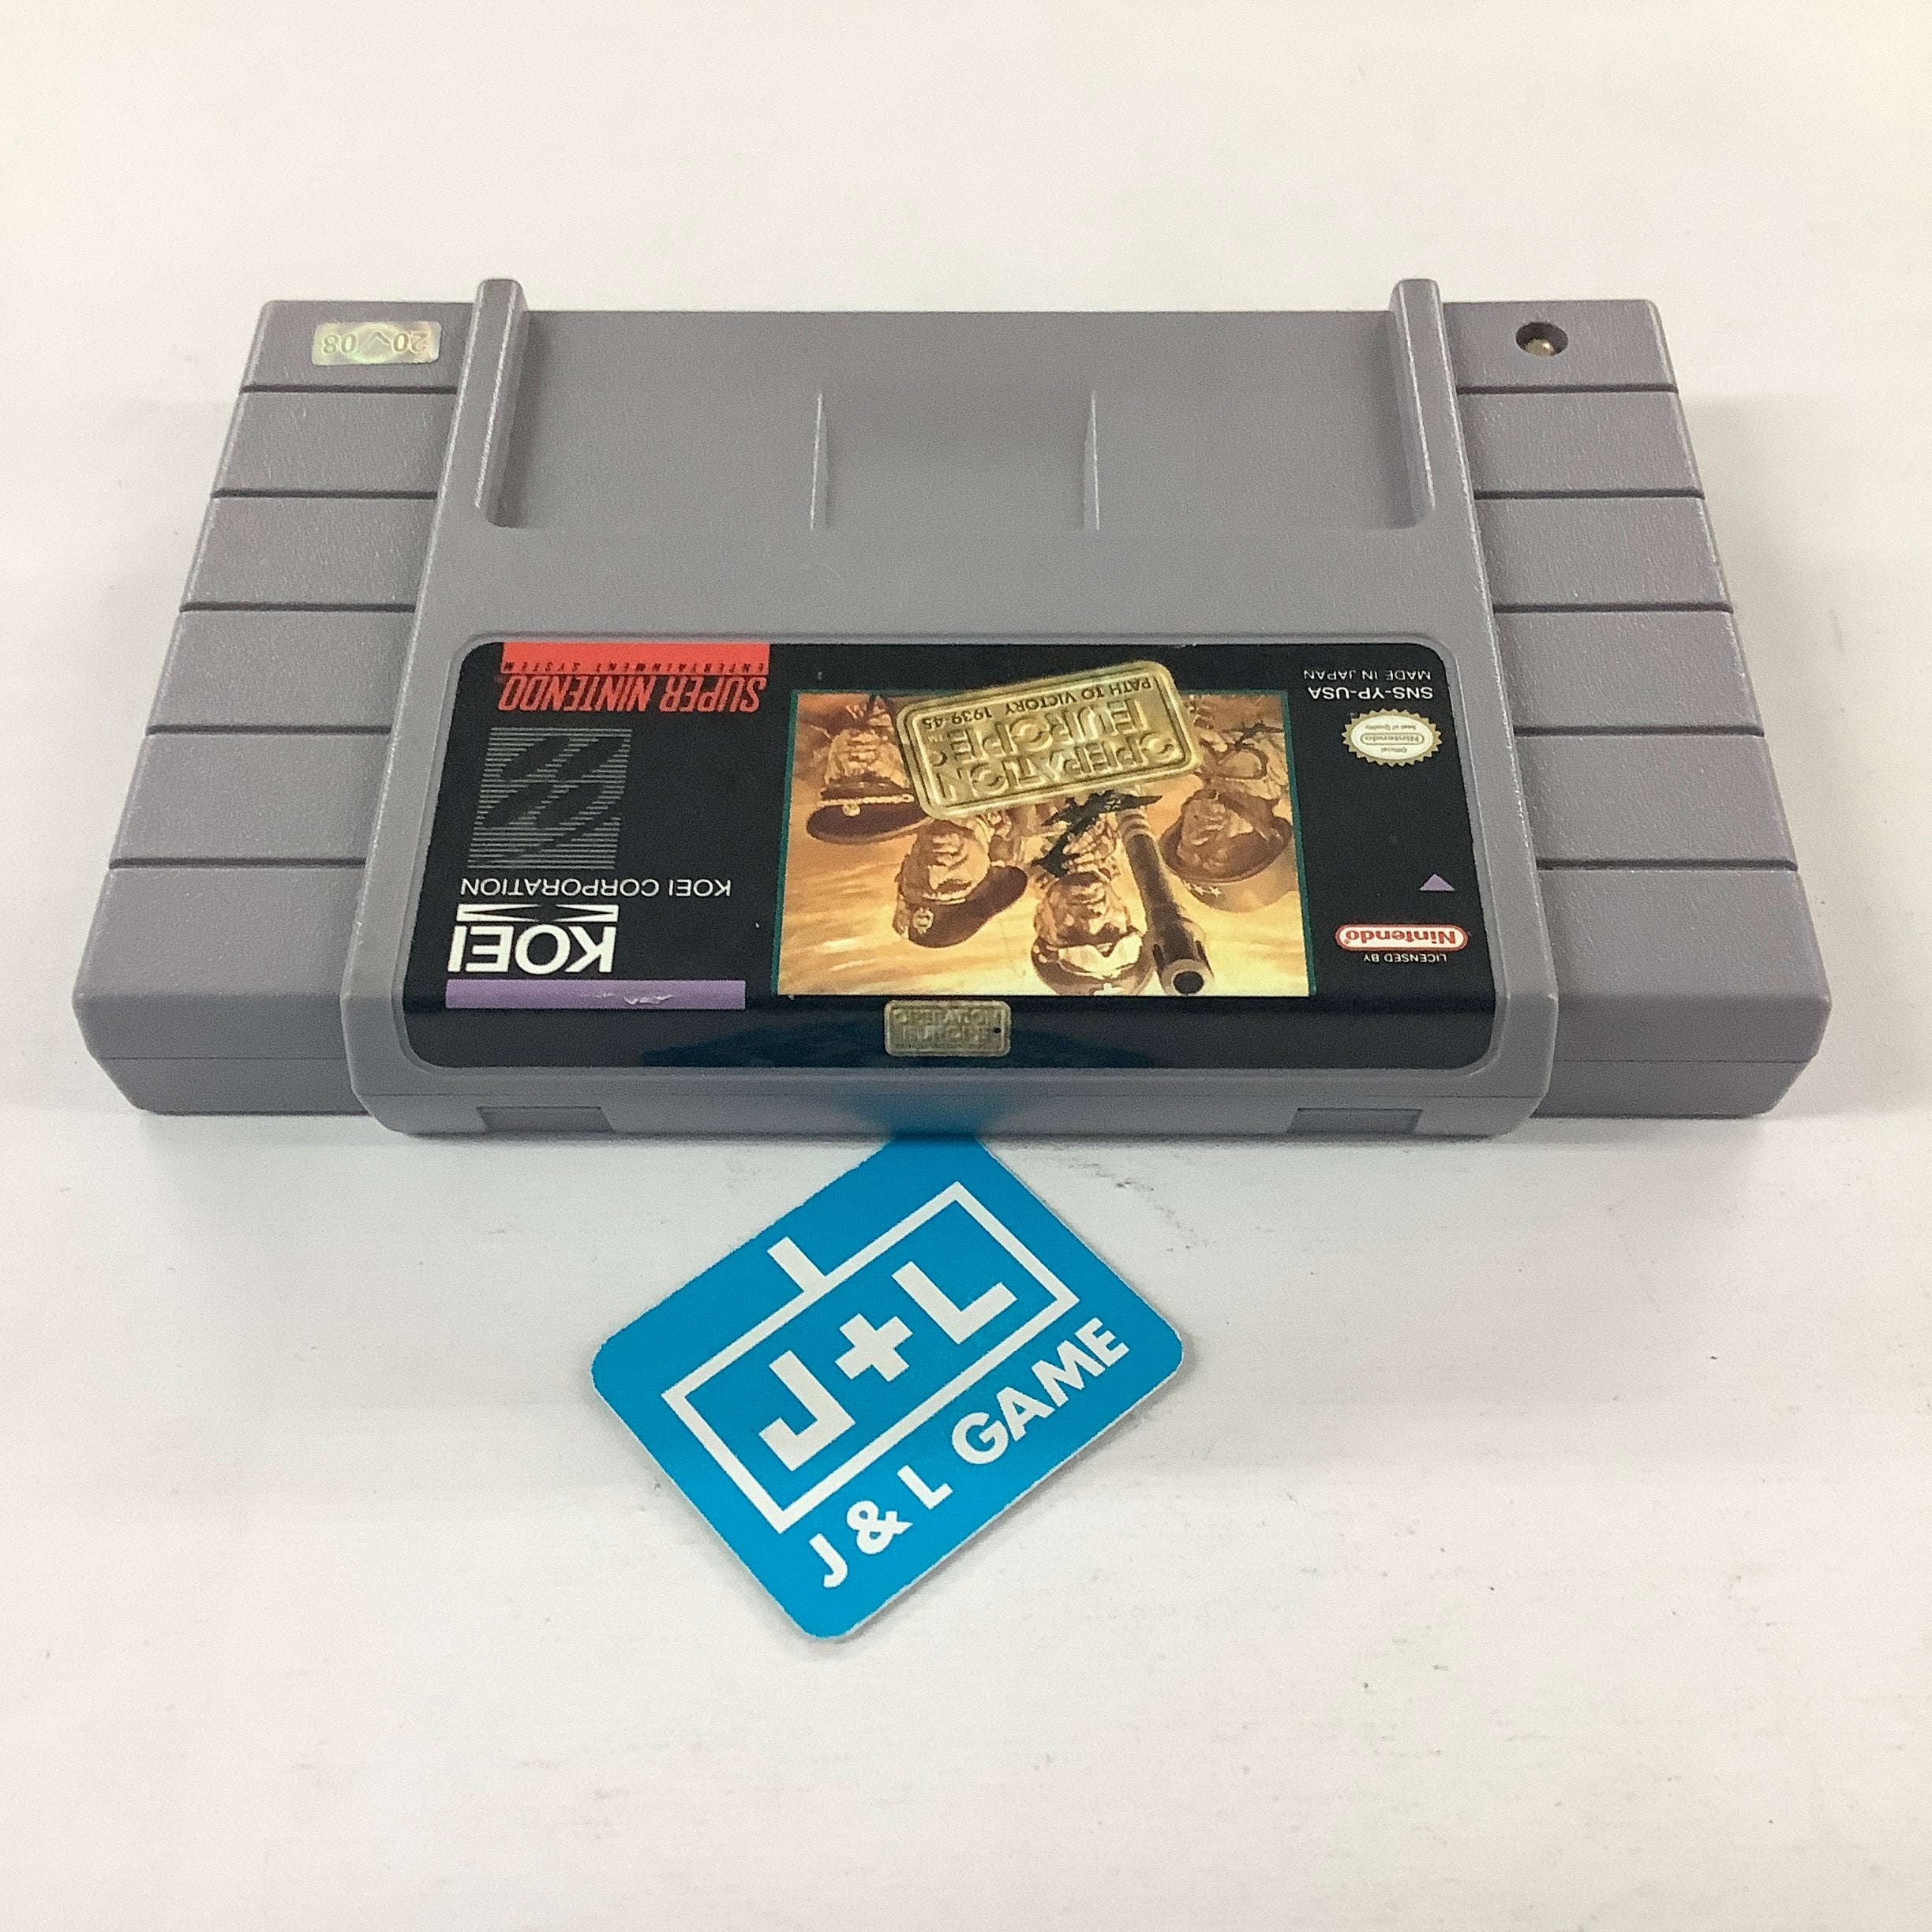 Operation Europe: Path to Victory 1939-45 - (SNES) Super Nintendo [Pre-Owned] Video Games Koei   